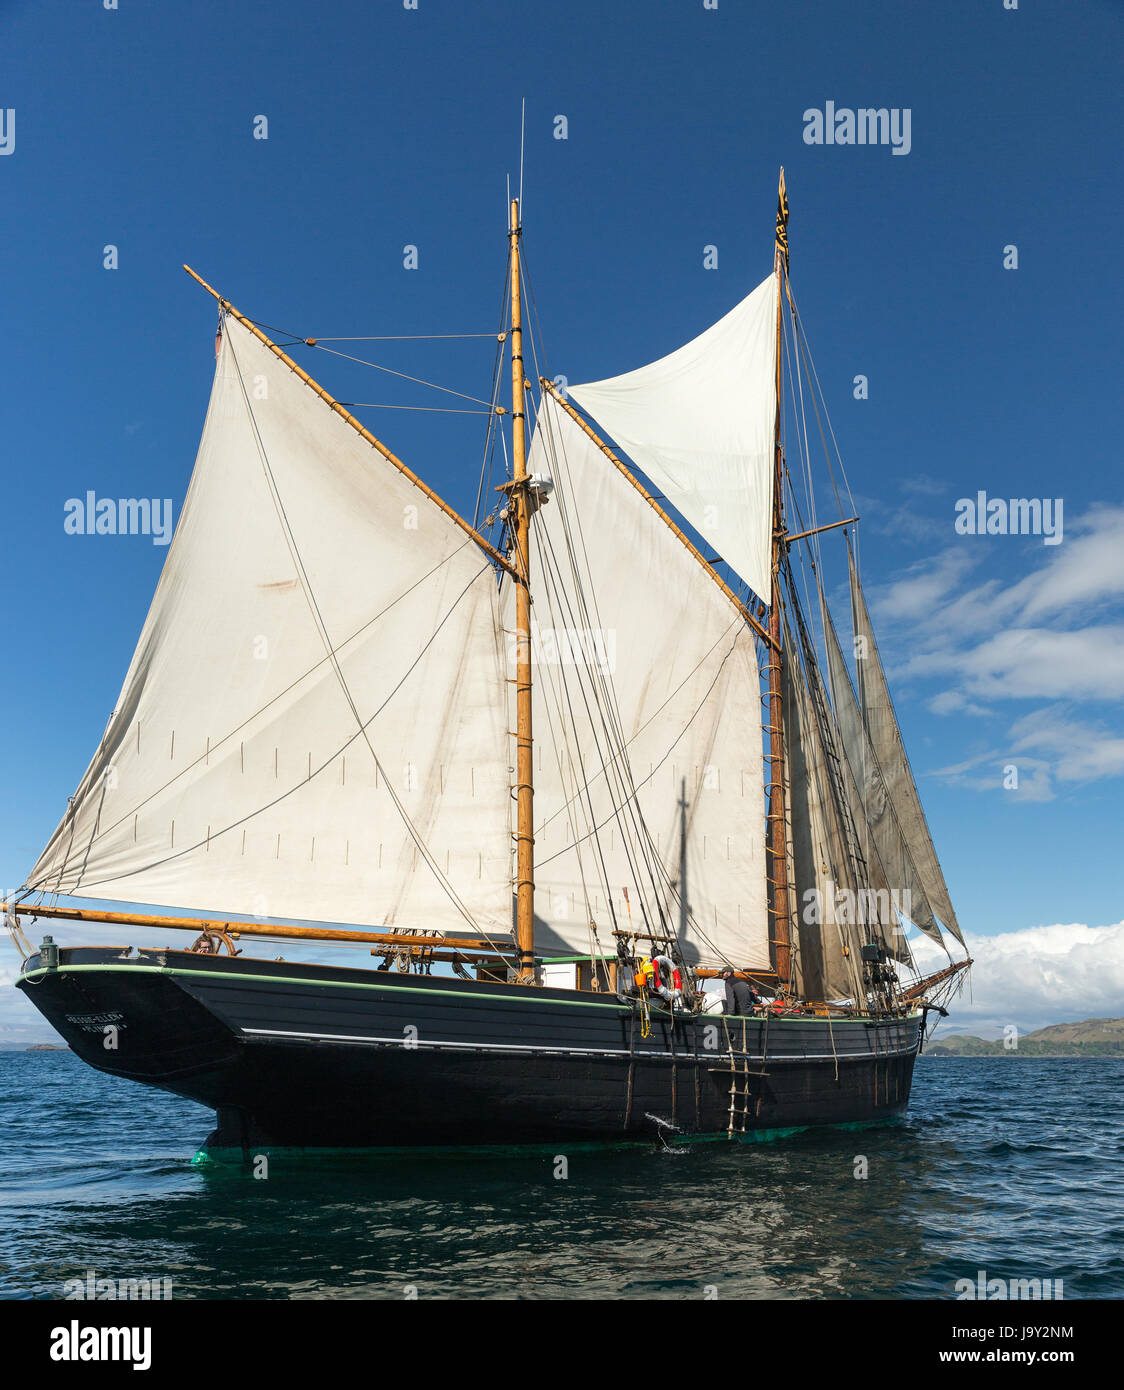 Twin masted sailing ship off the island of Kerrera, Oban, Scotland taken offshore from Gylan Castle Stock Photo